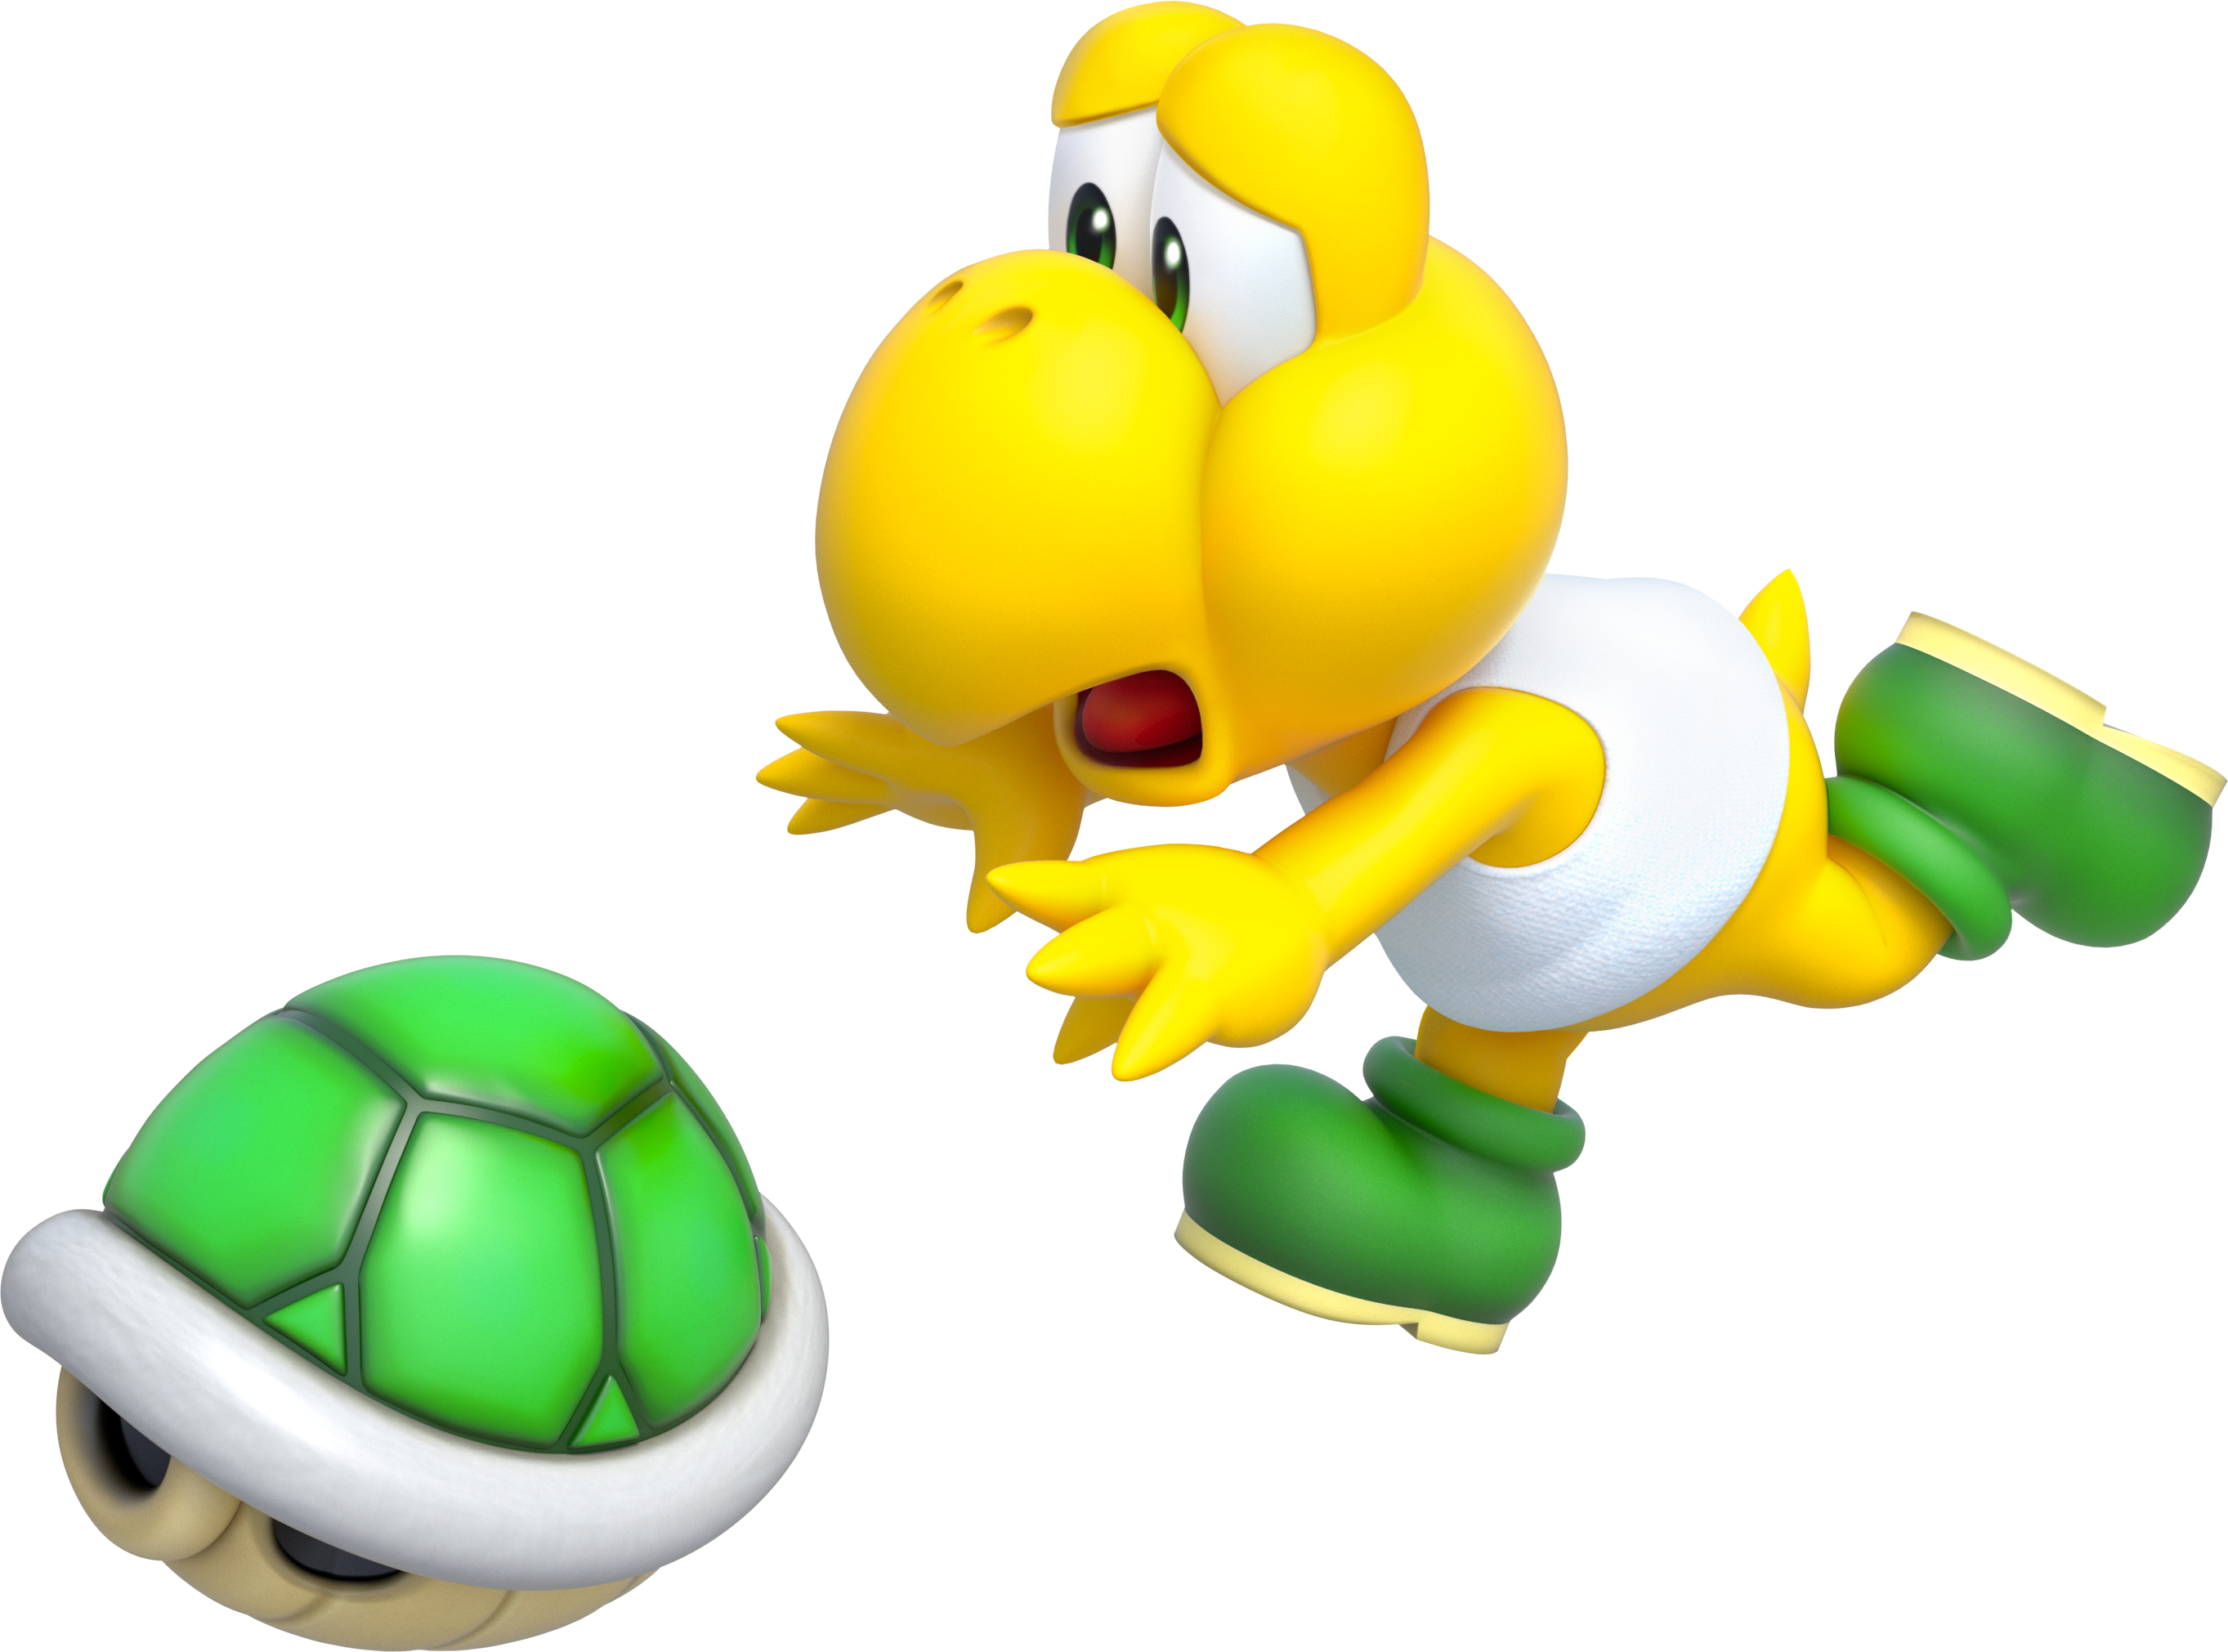 Koopa Troopa from Super Mario Bros. Game Art GameArtHQ